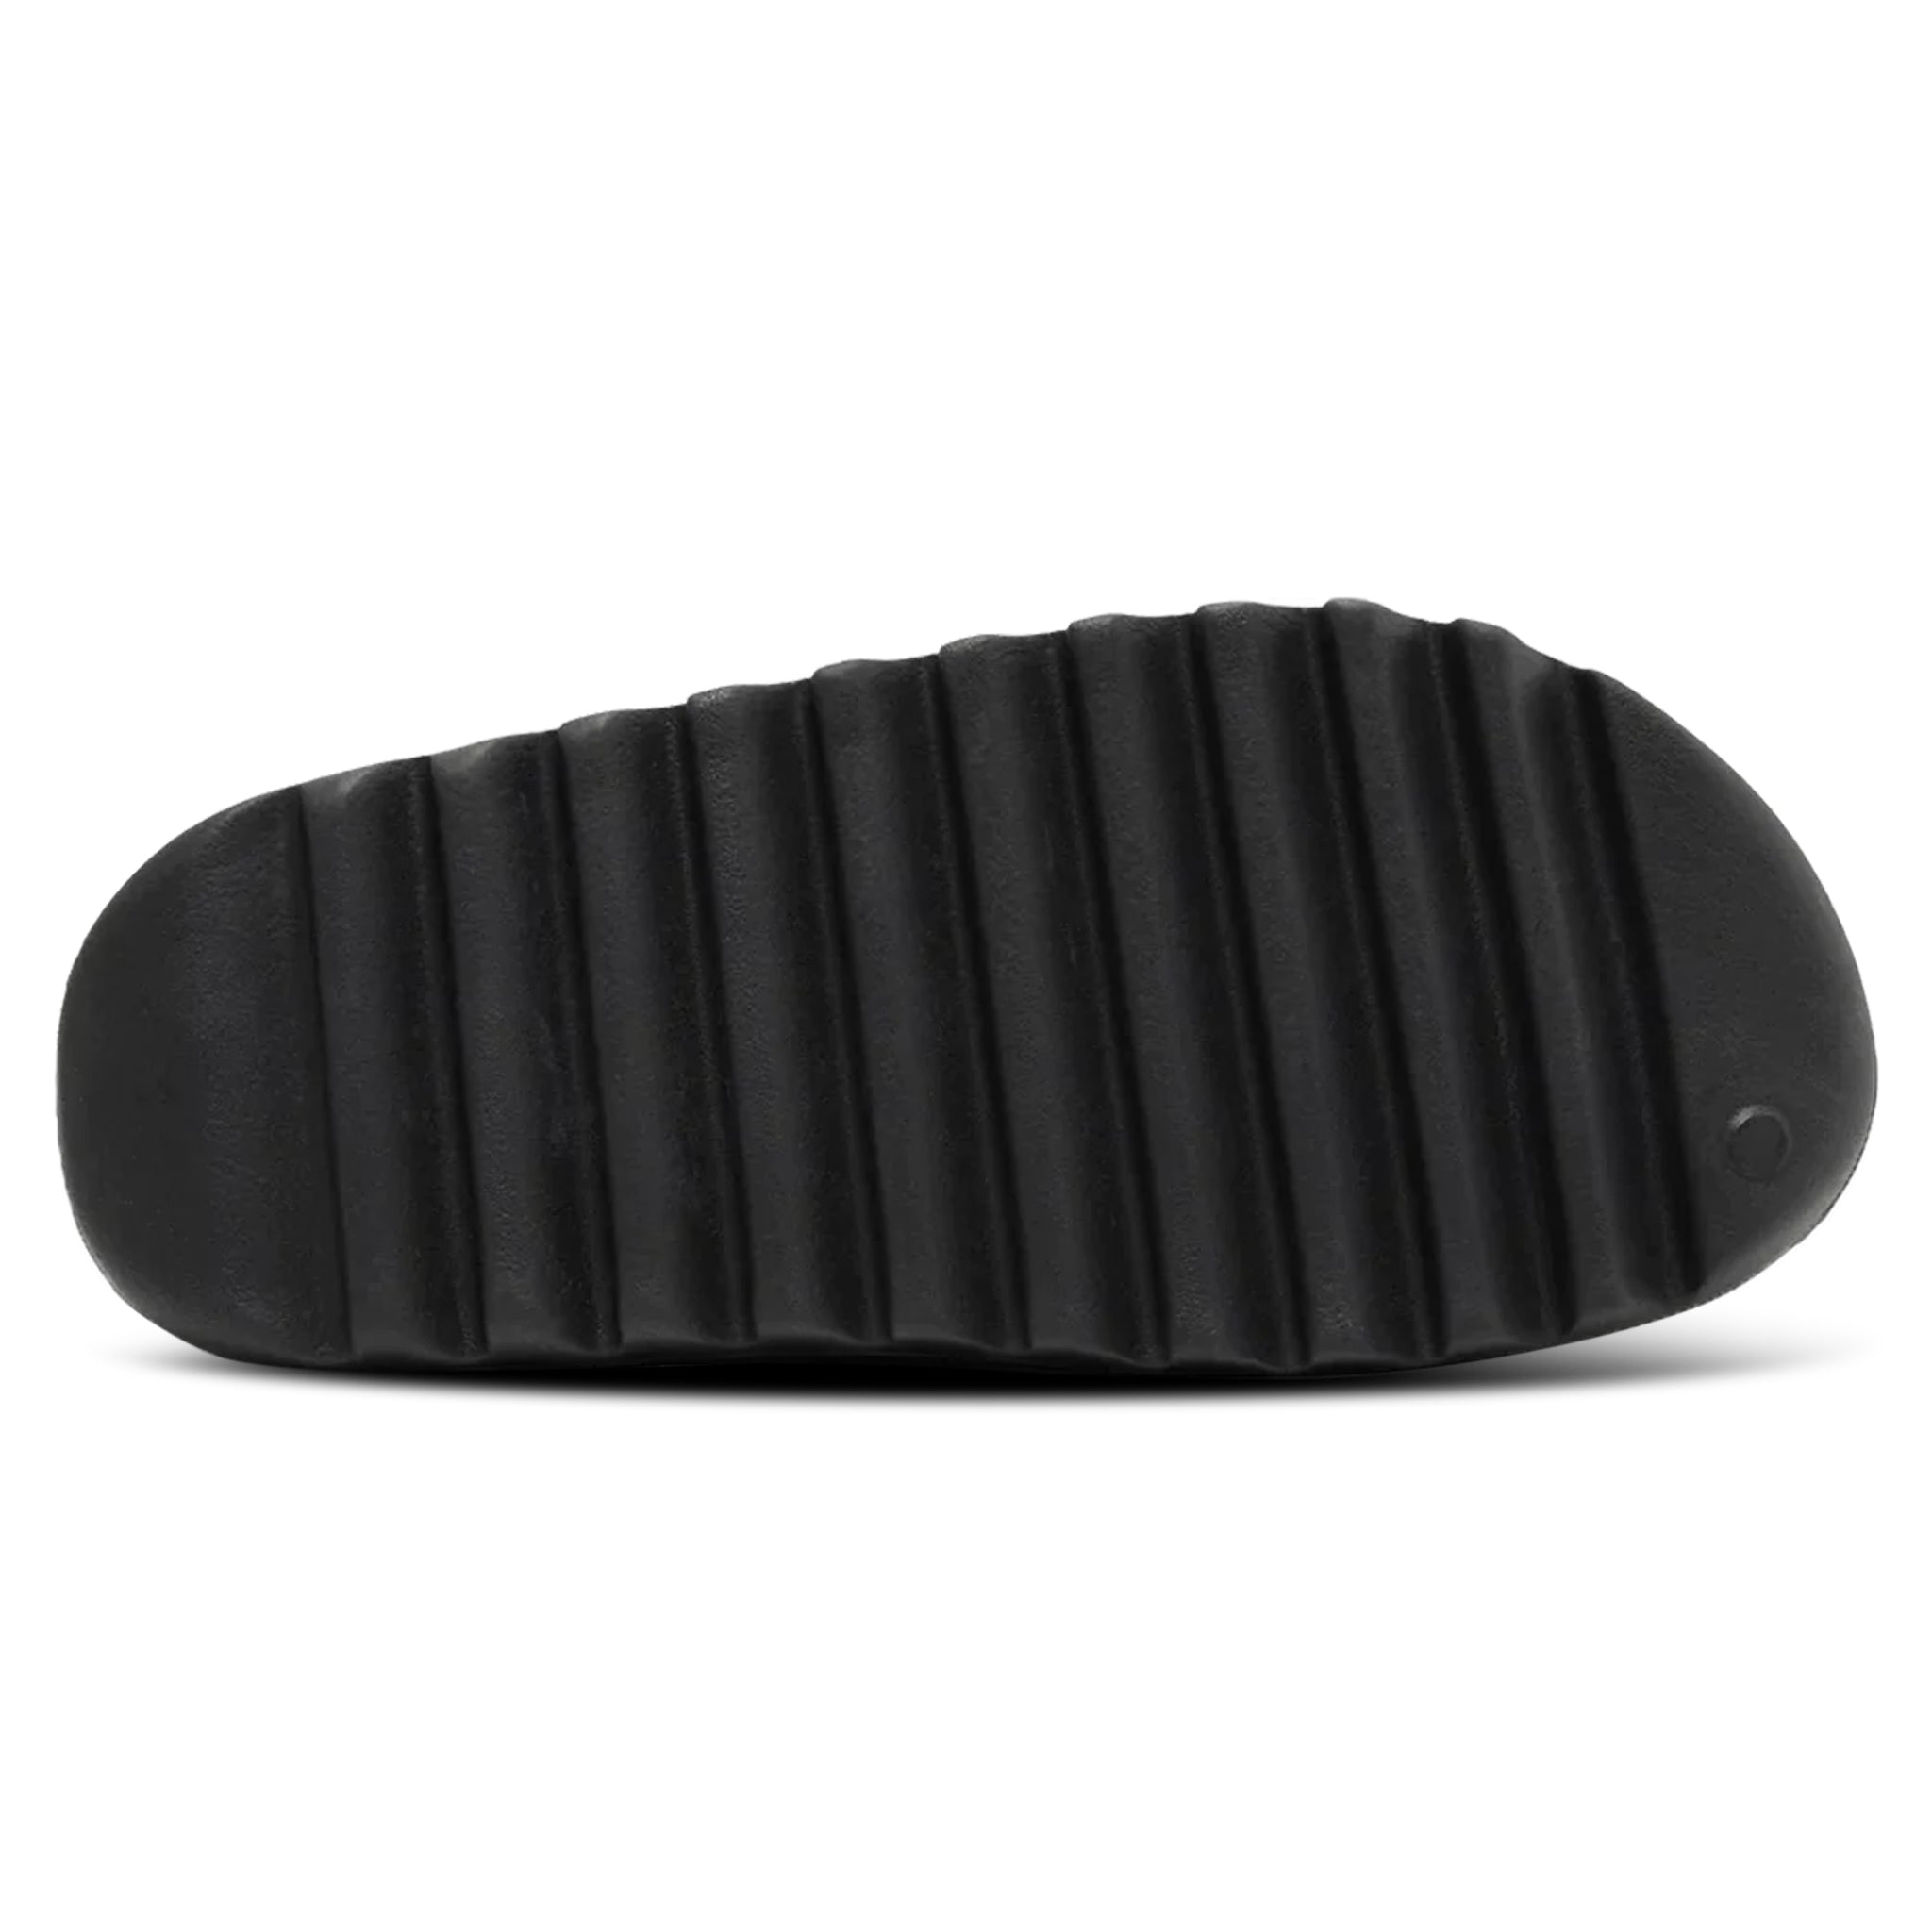 Sole view of Adidas Yeezy Slide Onyx HQ6448